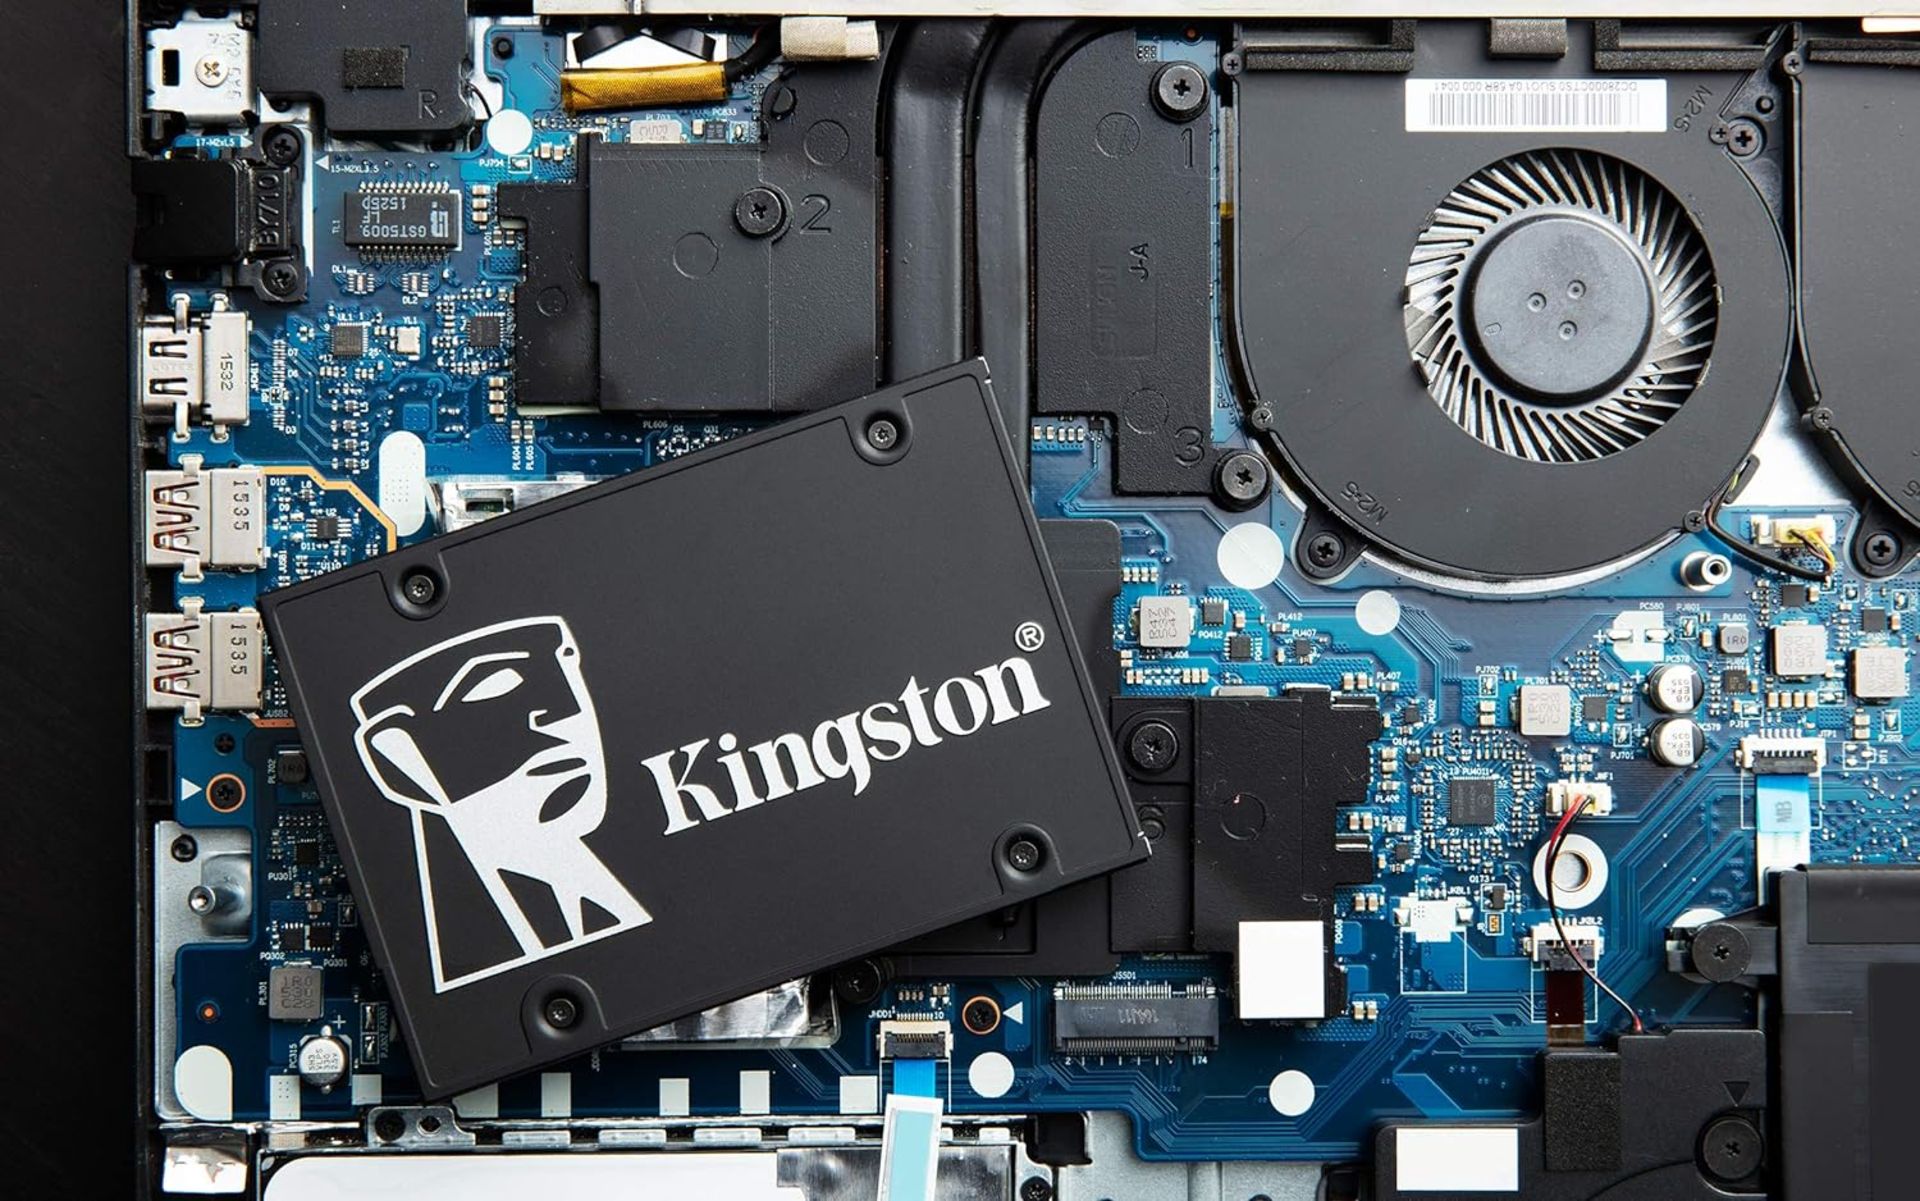 BRAND NEW FACTORY SEALED KINGSTON KC600 512GB SSD. RRP £75.99. Kingston’s KC600 is a full-capacity - Image 3 of 4